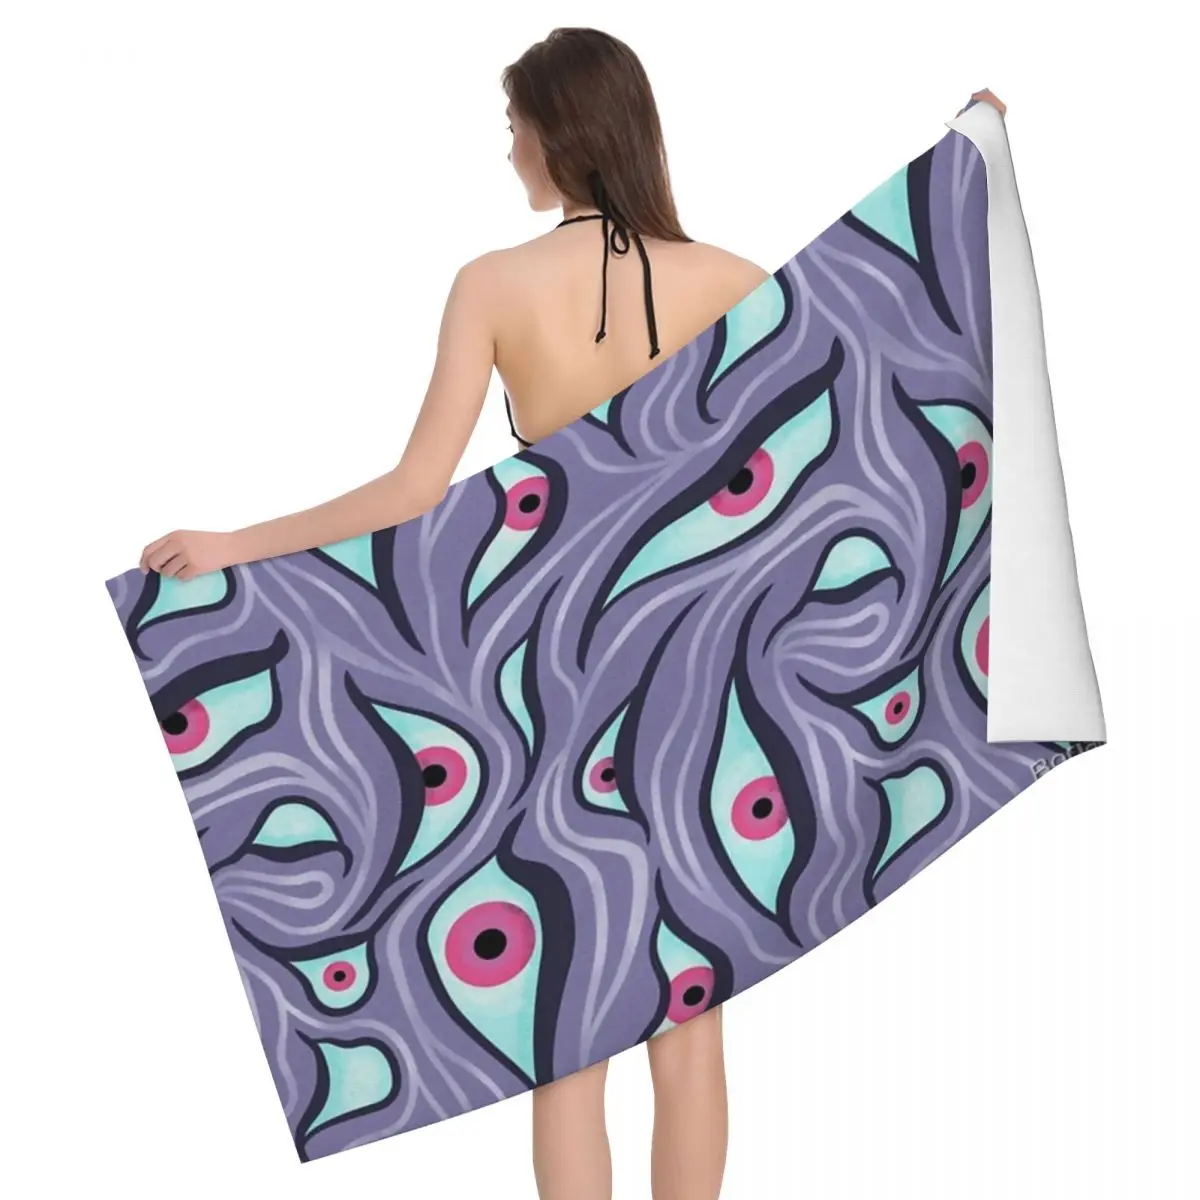 

New Life Grows From What's Lost Purple 80x130cm Bath Towel Skin-friendly For Bathroom Great Gift